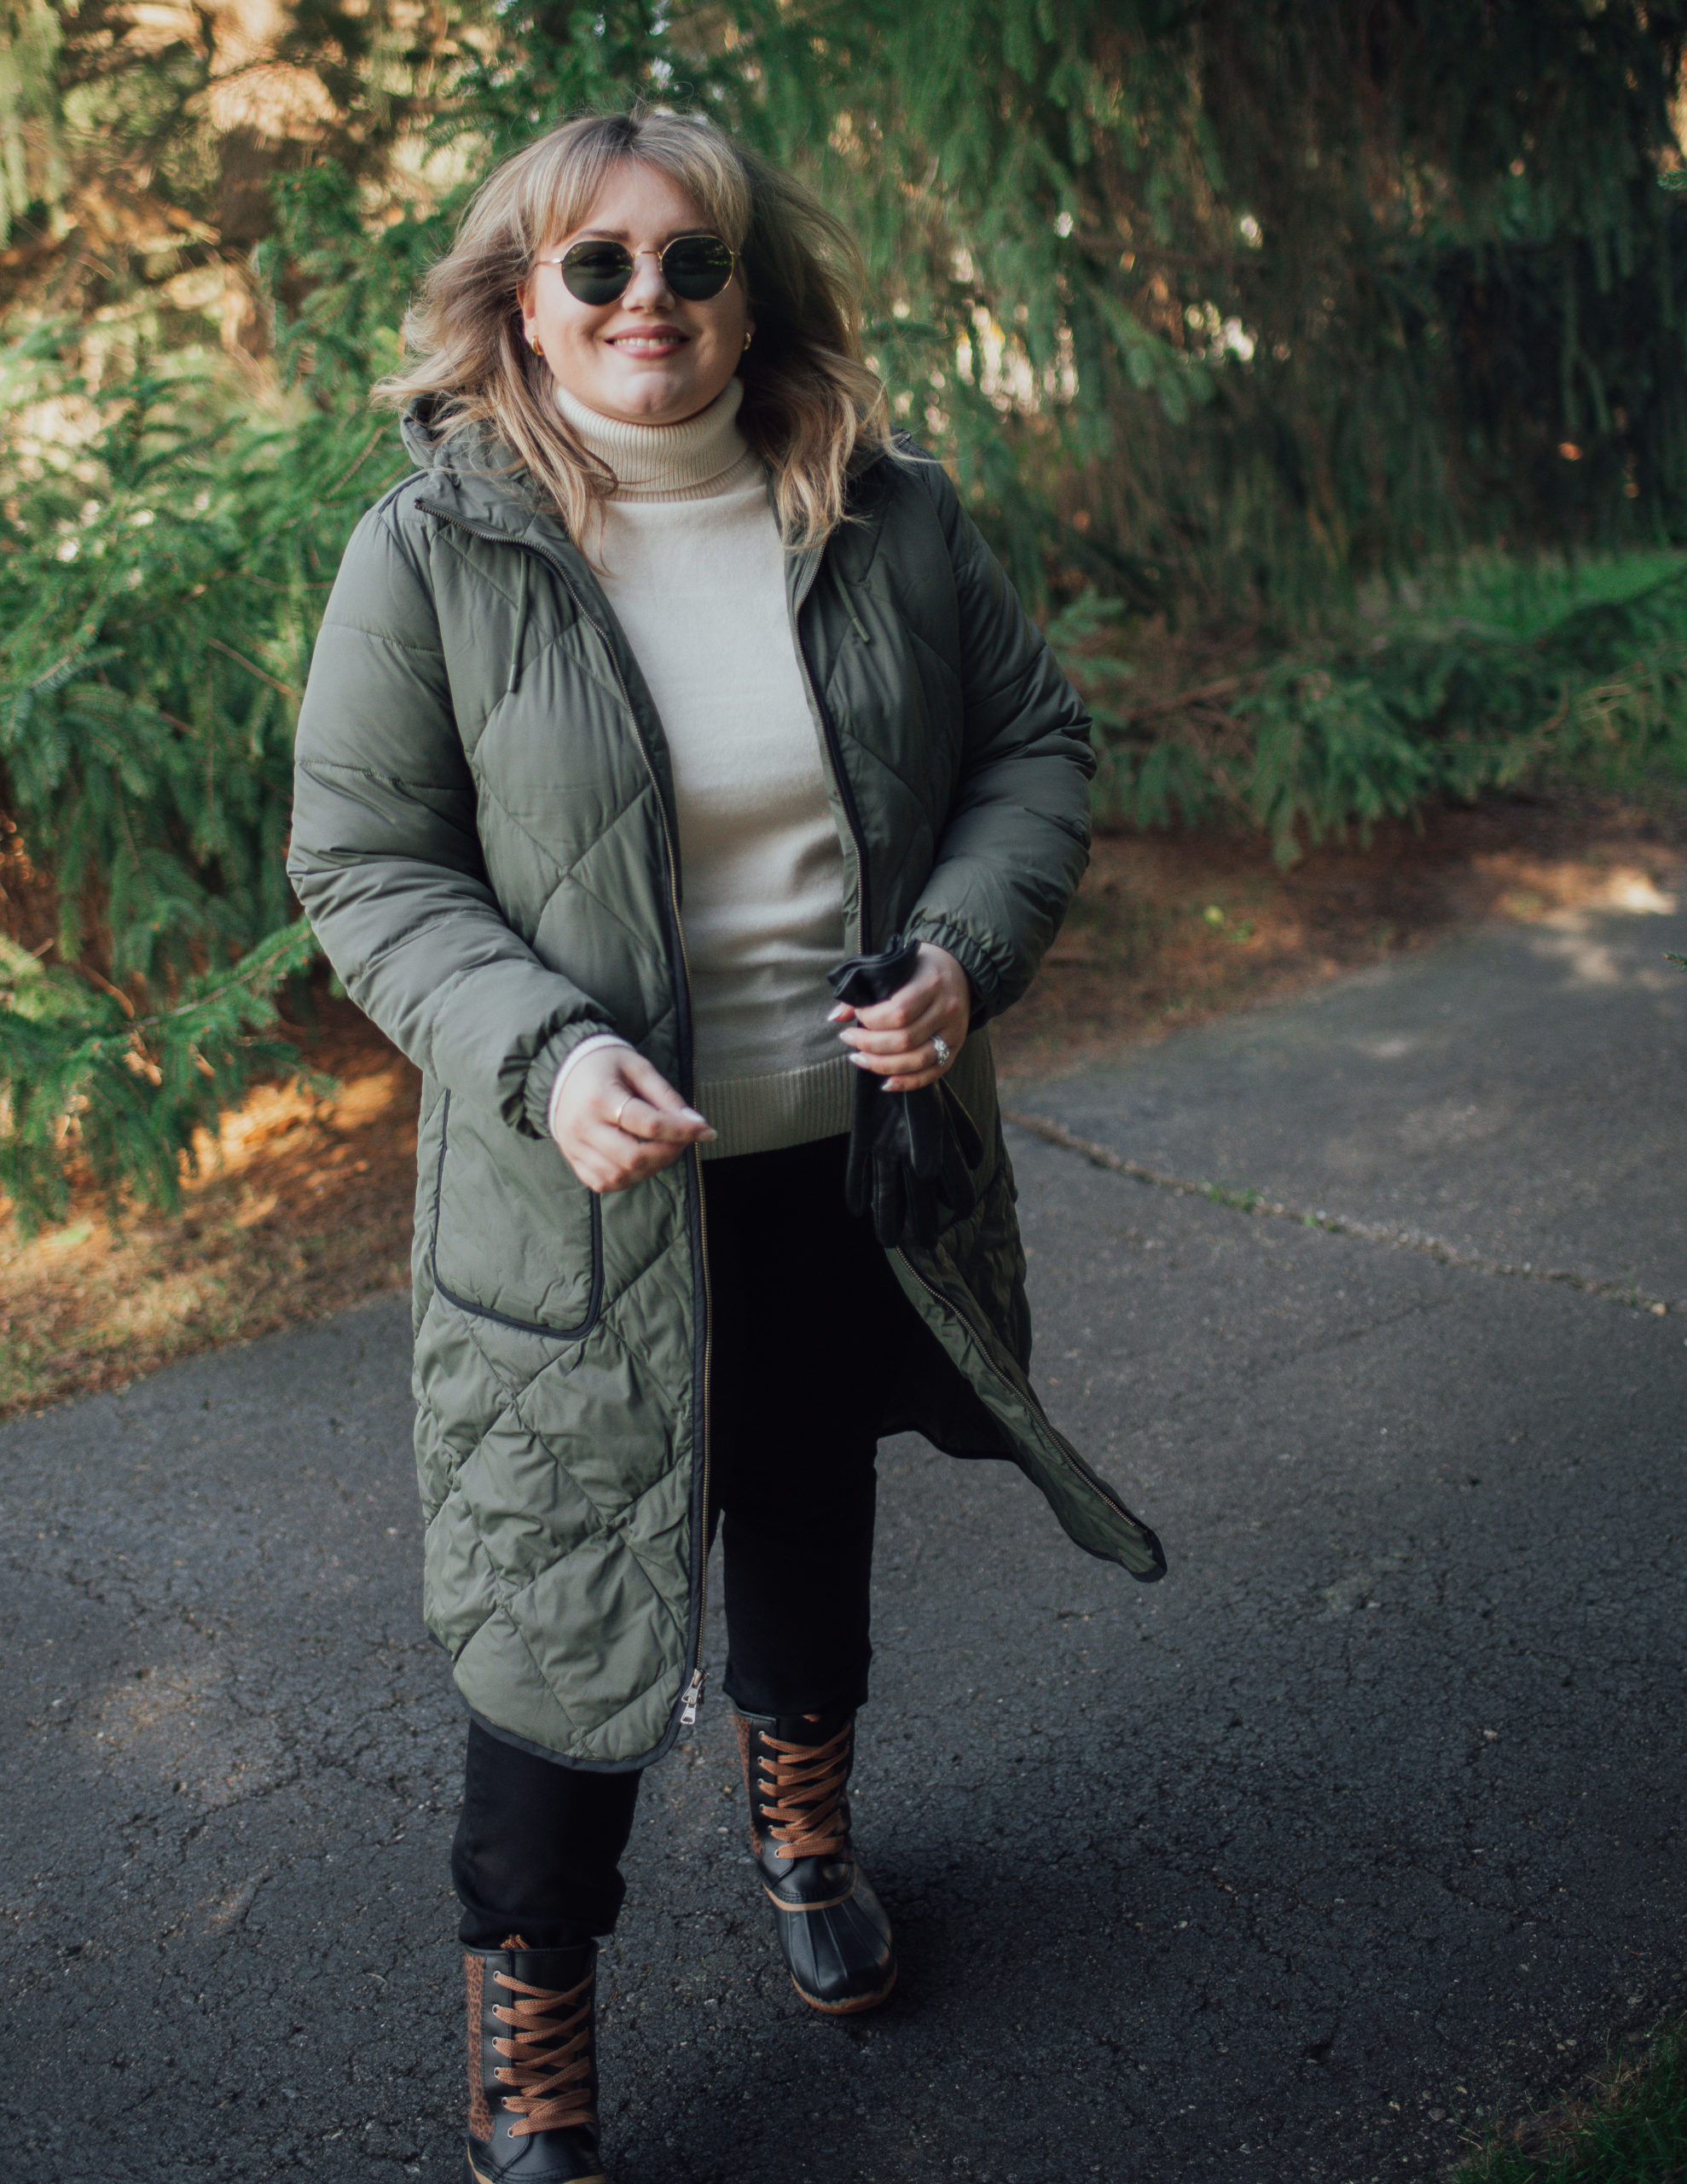 Sharing some plus size winter gear from LandsEnd. Styled in an easy chic way this look is stylish and warm. 